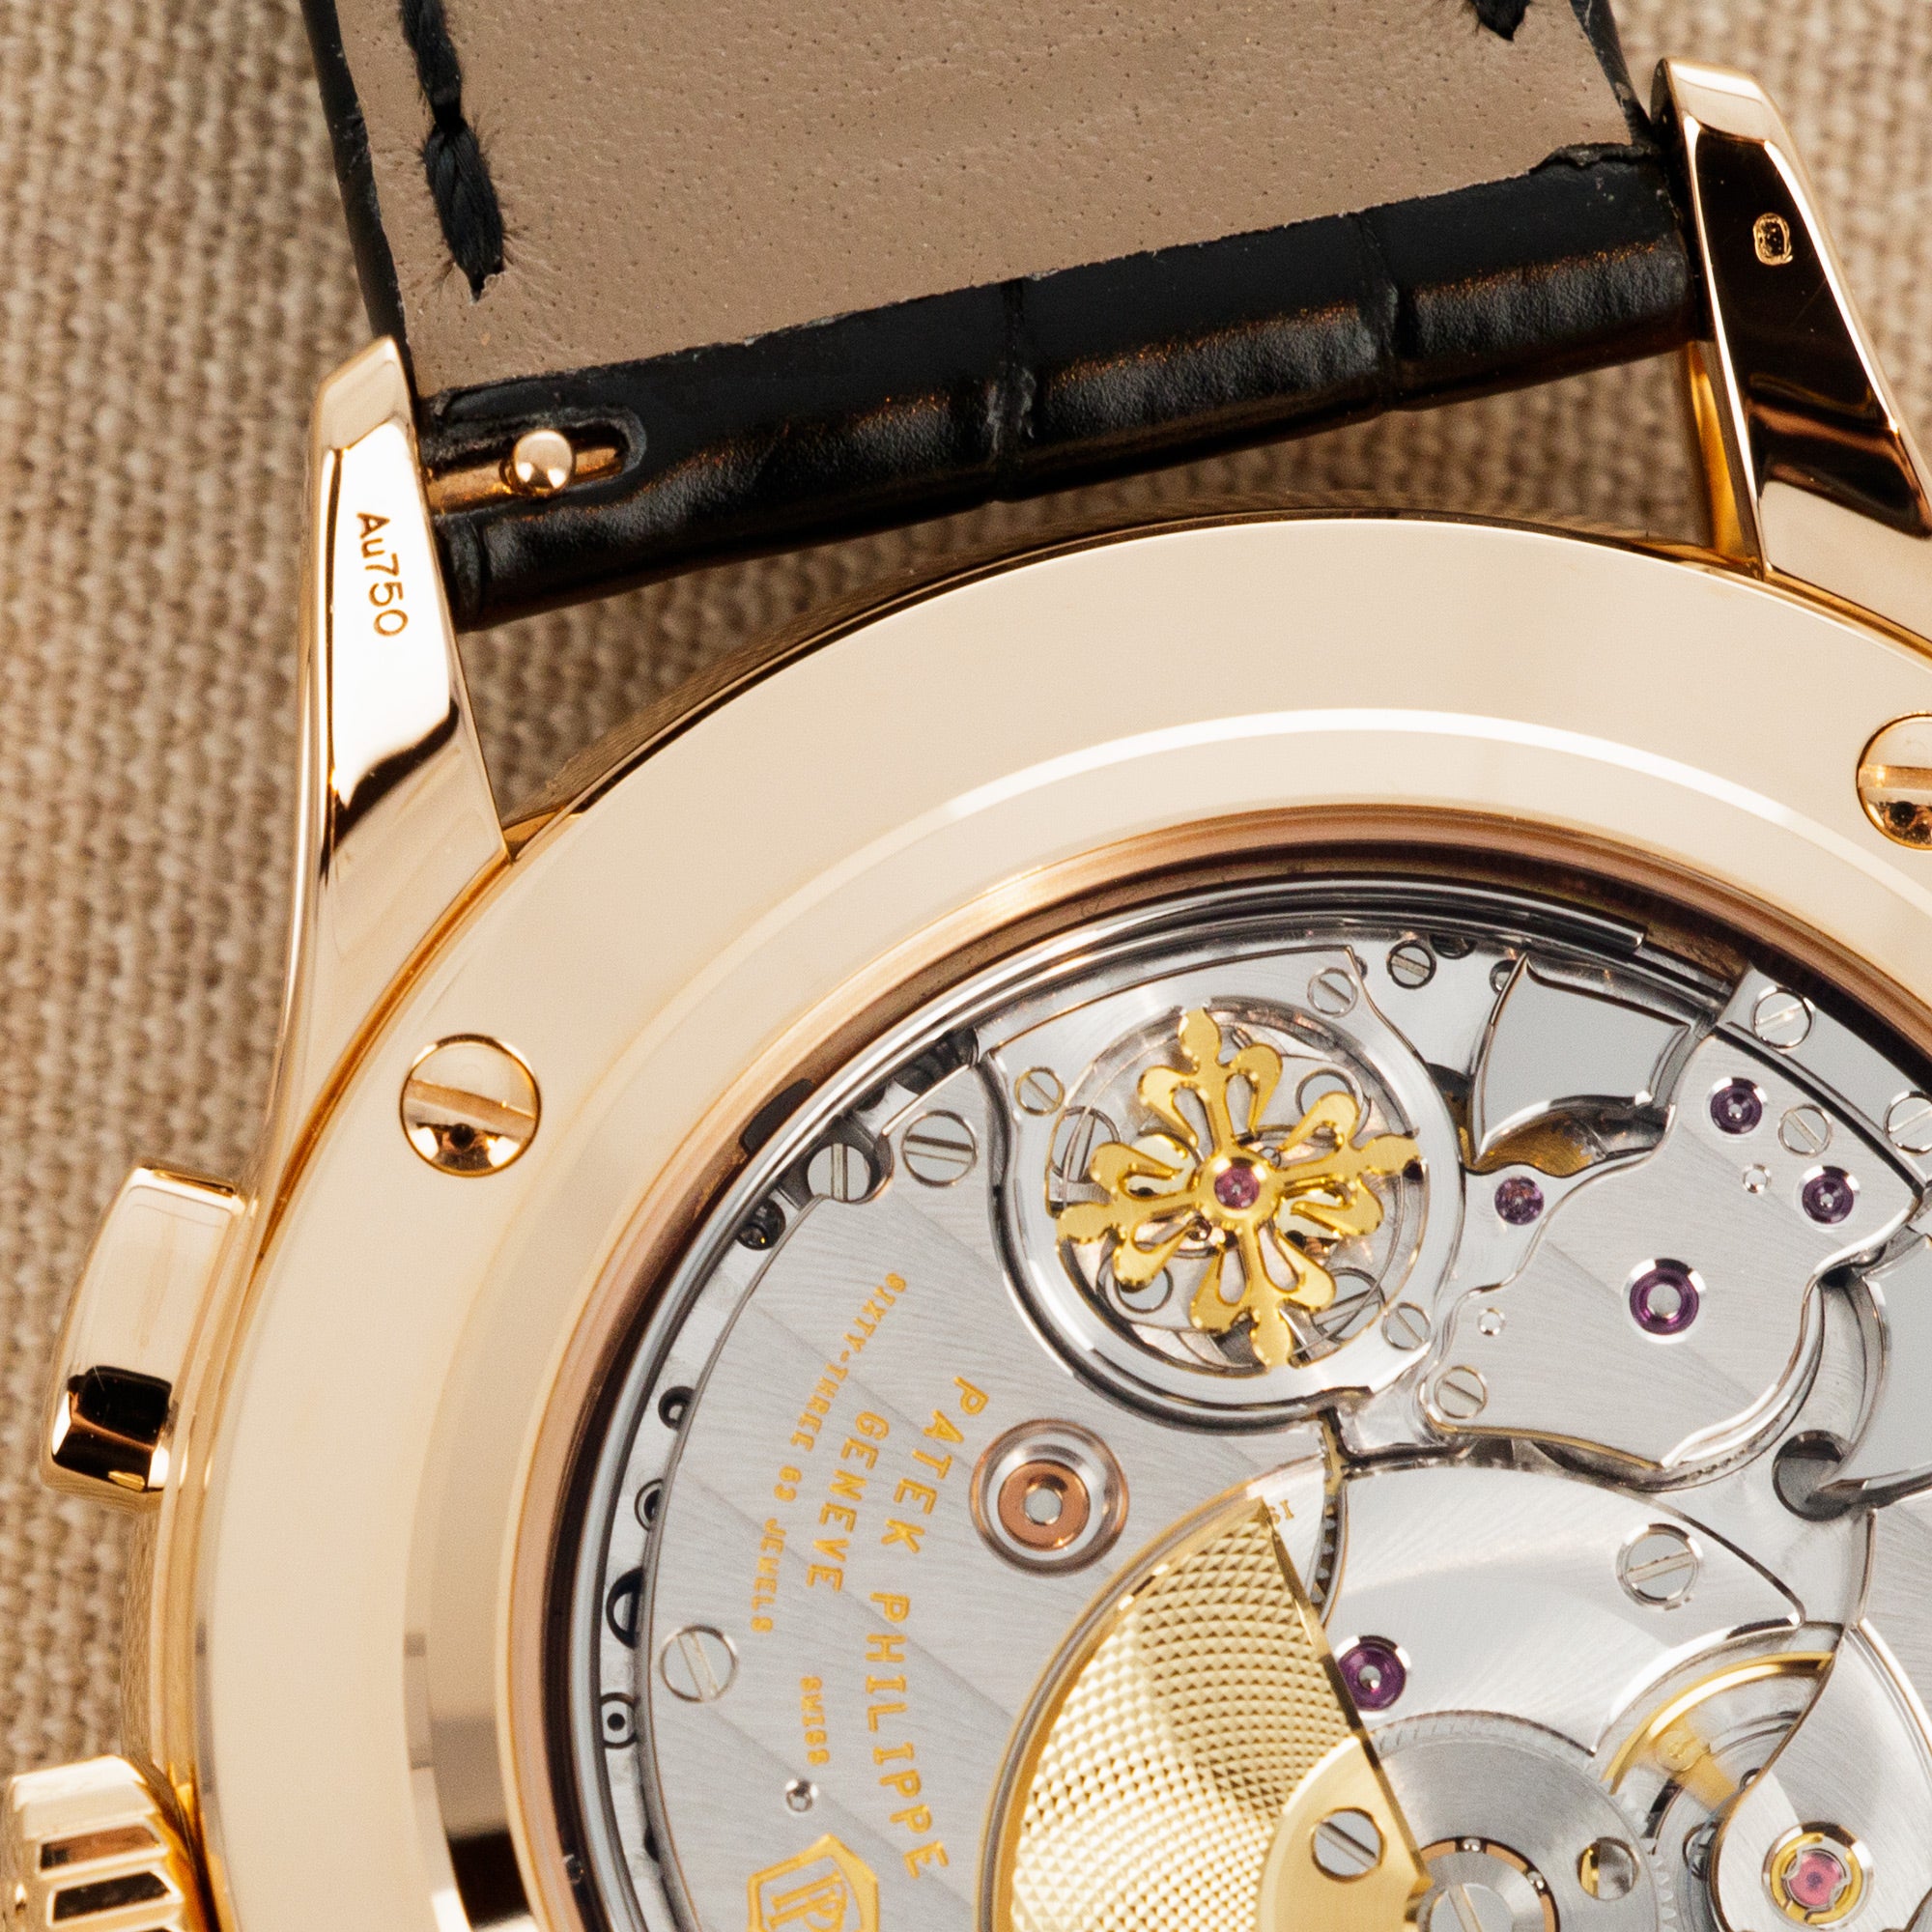 Patek Philippe - Patek Philippe Rose Gold Grand Complication Minute Repeater Ref. 5208 - The Keystone Watches